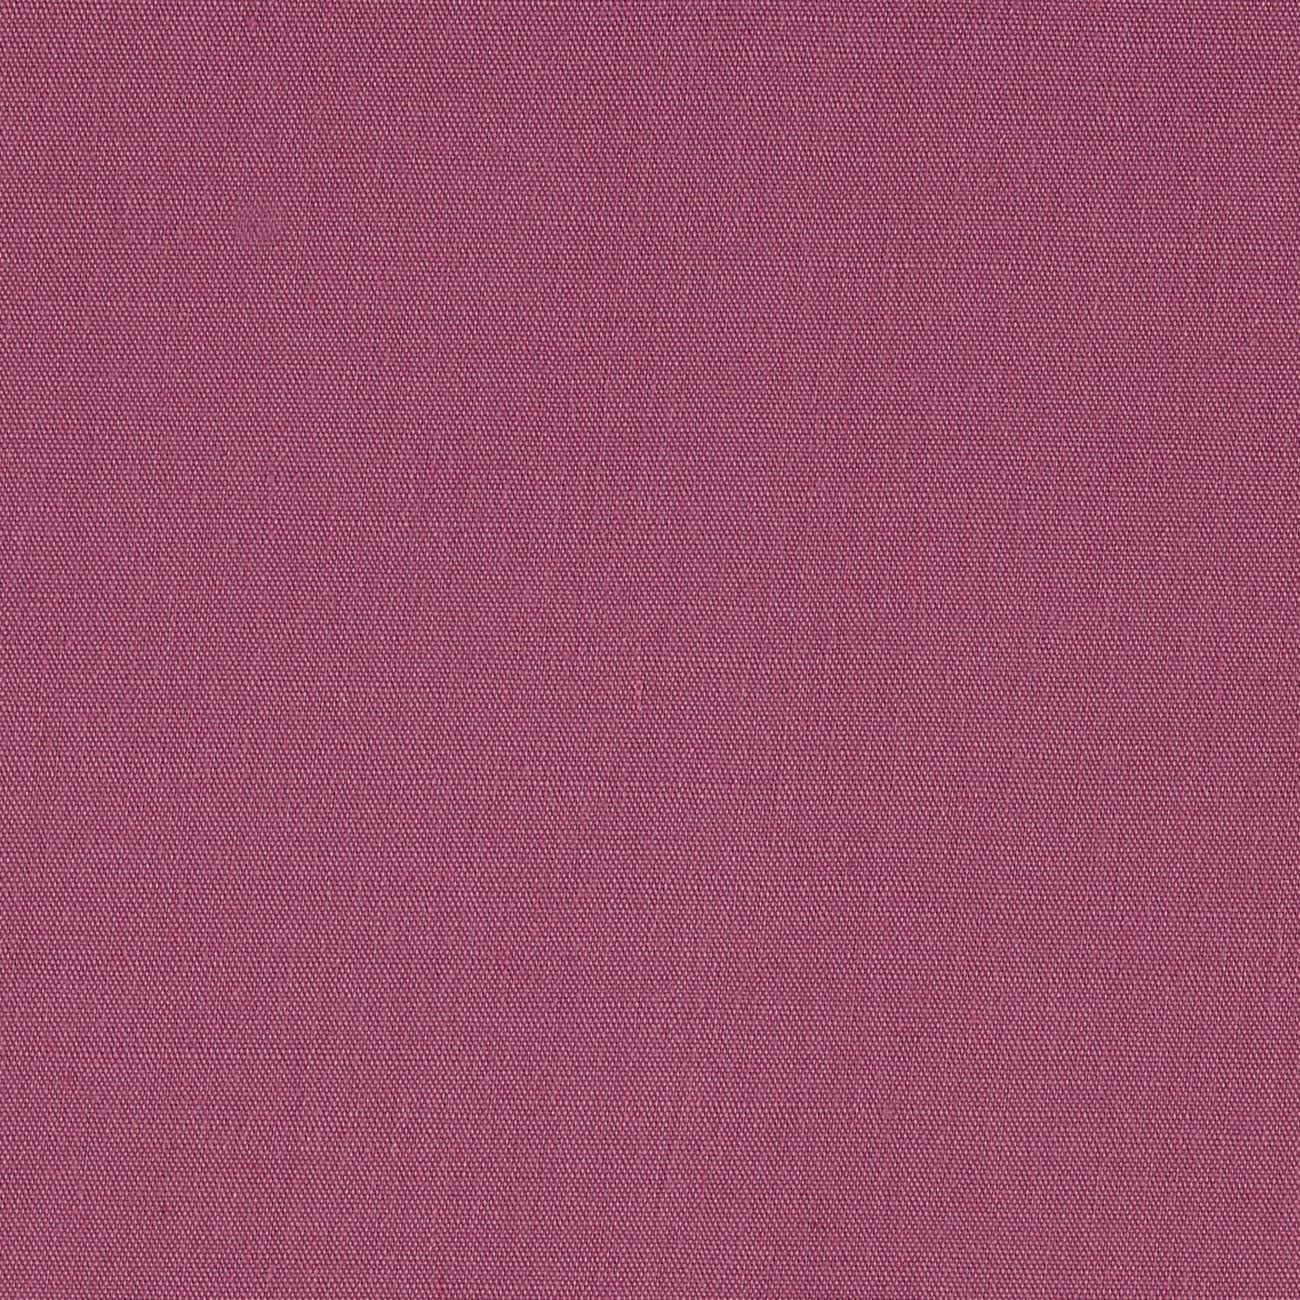 Premium Light Weight Poly Cotton Blend Broadcloth Fabric, Good to Make Face Mask Fabric (Mauve, 1 Yard)